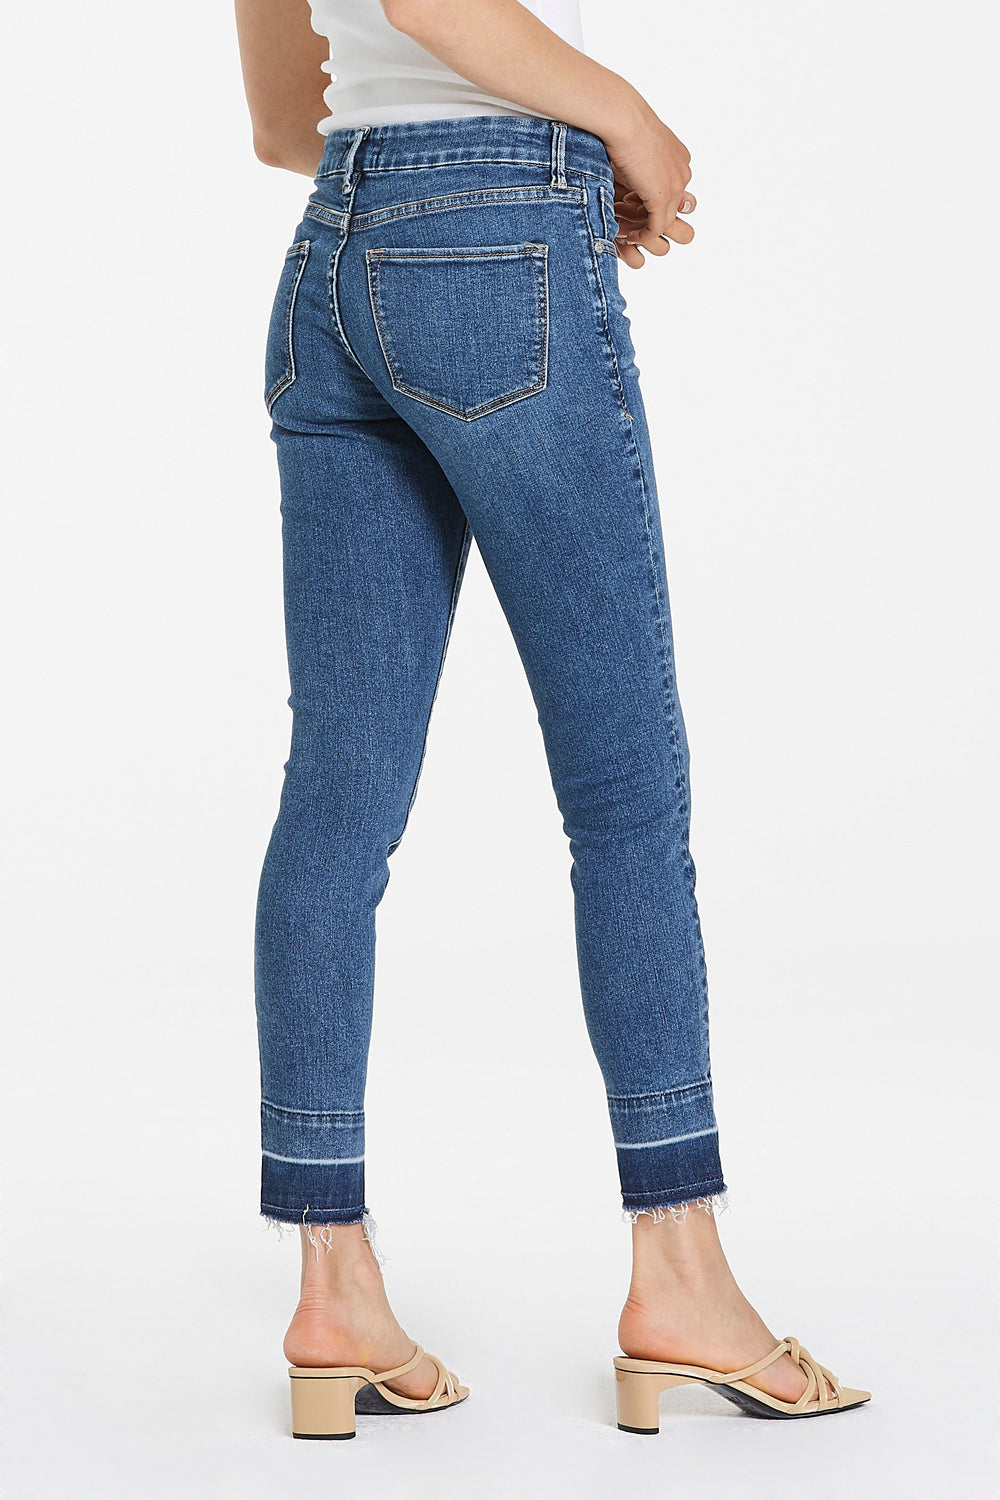 image of a female model wearing a JOYRICH MID RISE ANKLE SKINNY JEANS MALLORCA JEANS